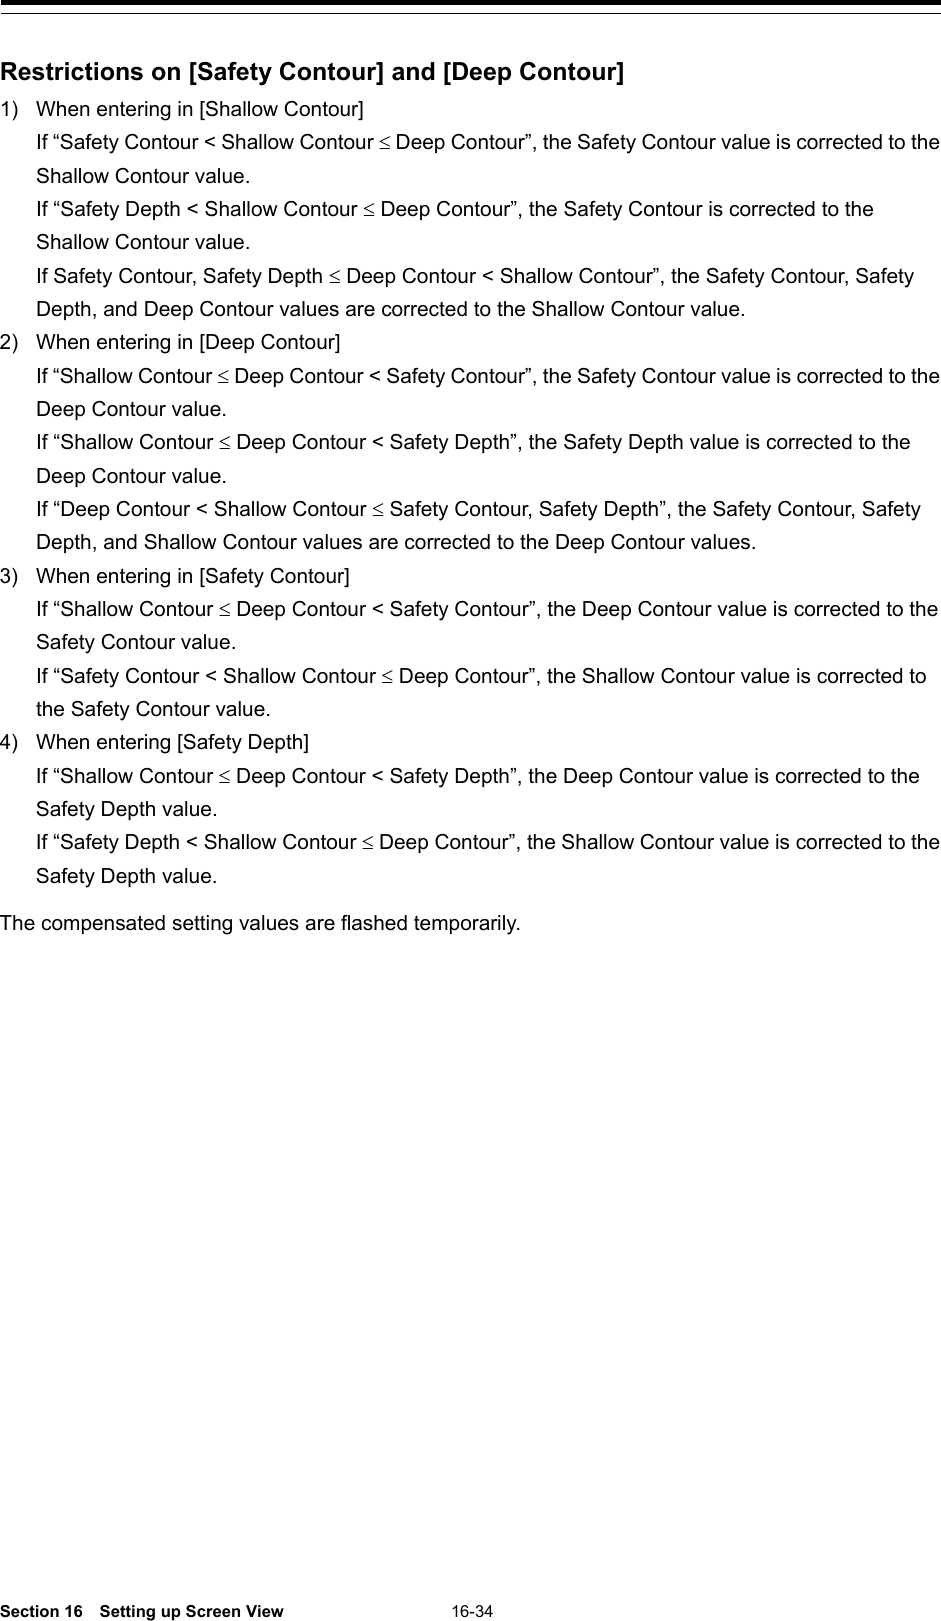  Section 16  Setting up Screen View 16-34  Restrictions on [Safety Contour] and [Deep Contour] 1) When entering in [Shallow Contour]  If “Safety Contour &lt; Shallow Contour ≤ Deep Contour”, the Safety Contour value is corrected to the Shallow Contour value.  If “Safety Depth &lt; Shallow Contour ≤ Deep Contour”, the Safety Contour is corrected to the Shallow Contour value.  If Safety Contour, Safety Depth ≤ Deep Contour &lt; Shallow Contour”, the Safety Contour, Safety Depth, and Deep Contour values are corrected to the Shallow Contour value. 2) When entering in [Deep Contour]  If “Shallow Contour ≤ Deep Contour &lt; Safety Contour”, the Safety Contour value is corrected to the Deep Contour value.  If “Shallow Contour ≤ Deep Contour &lt; Safety Depth”, the Safety Depth value is corrected to the Deep Contour value.  If “Deep Contour &lt; Shallow Contour ≤ Safety Contour, Safety Depth”, the Safety Contour, Safety Depth, and Shallow Contour values are corrected to the Deep Contour values. 3) When entering in [Safety Contour]  If “Shallow Contour ≤ Deep Contour &lt; Safety Contour”, the Deep Contour value is corrected to the Safety Contour value.  If “Safety Contour &lt; Shallow Contour ≤ Deep Contour”, the Shallow Contour value is corrected to the Safety Contour value. 4) When entering [Safety Depth]  If “Shallow Contour ≤ Deep Contour &lt; Safety Depth”, the Deep Contour value is corrected to the Safety Depth value.  If “Safety Depth &lt; Shallow Contour ≤ Deep Contour”, the Shallow Contour value is corrected to the Safety Depth value.  The compensated setting values are flashed temporarily.    